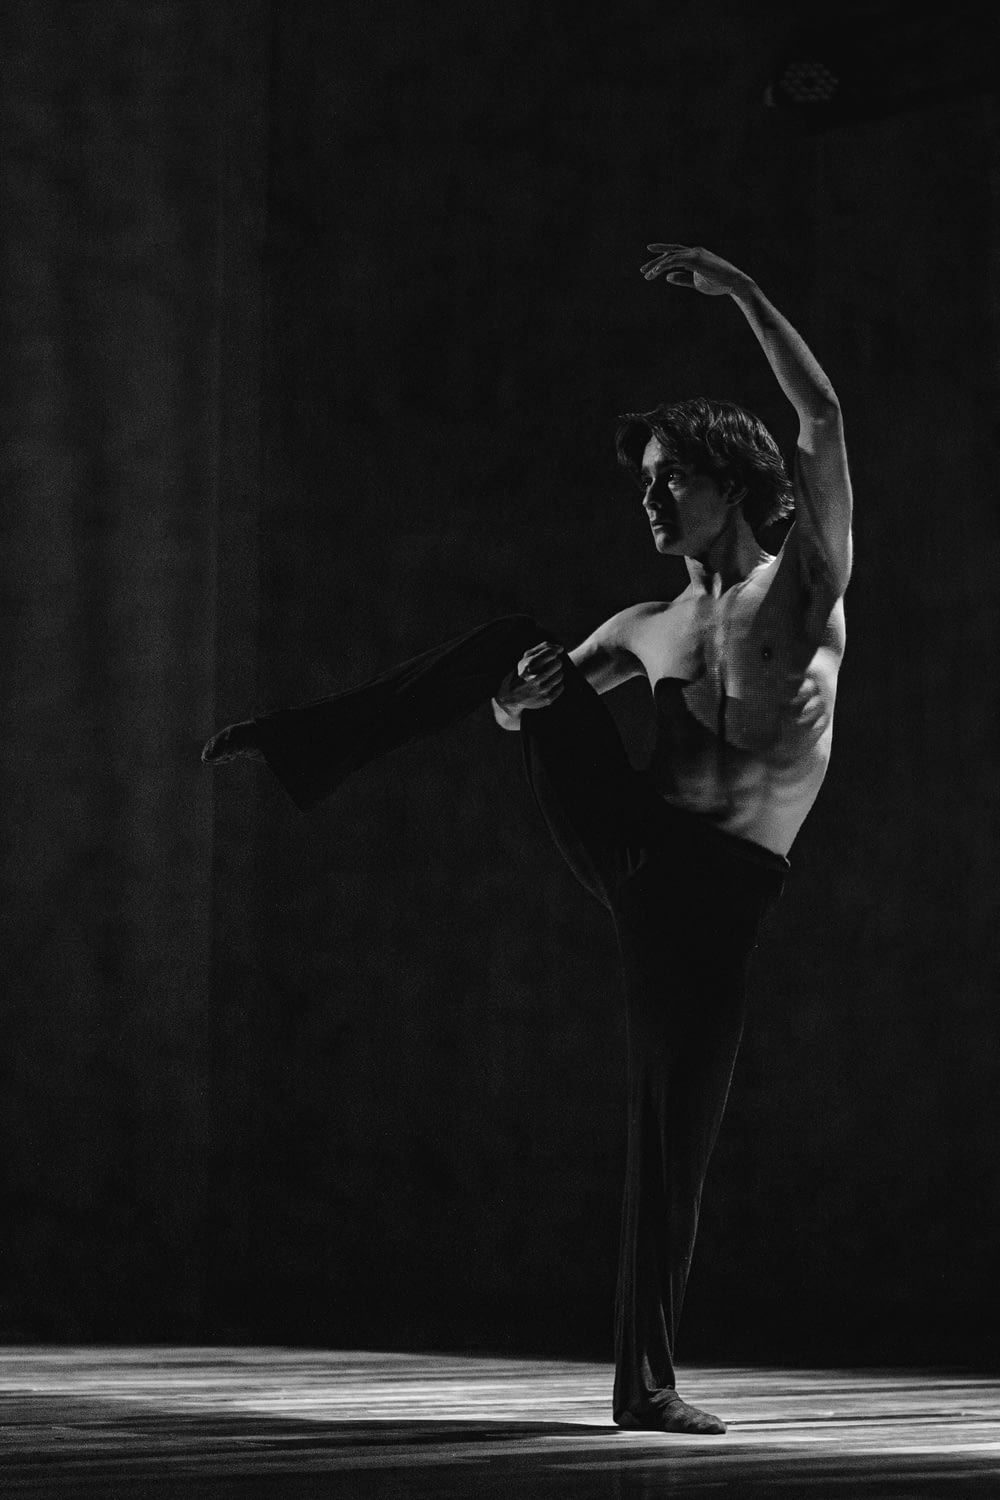 a black and white photo of a ballerina